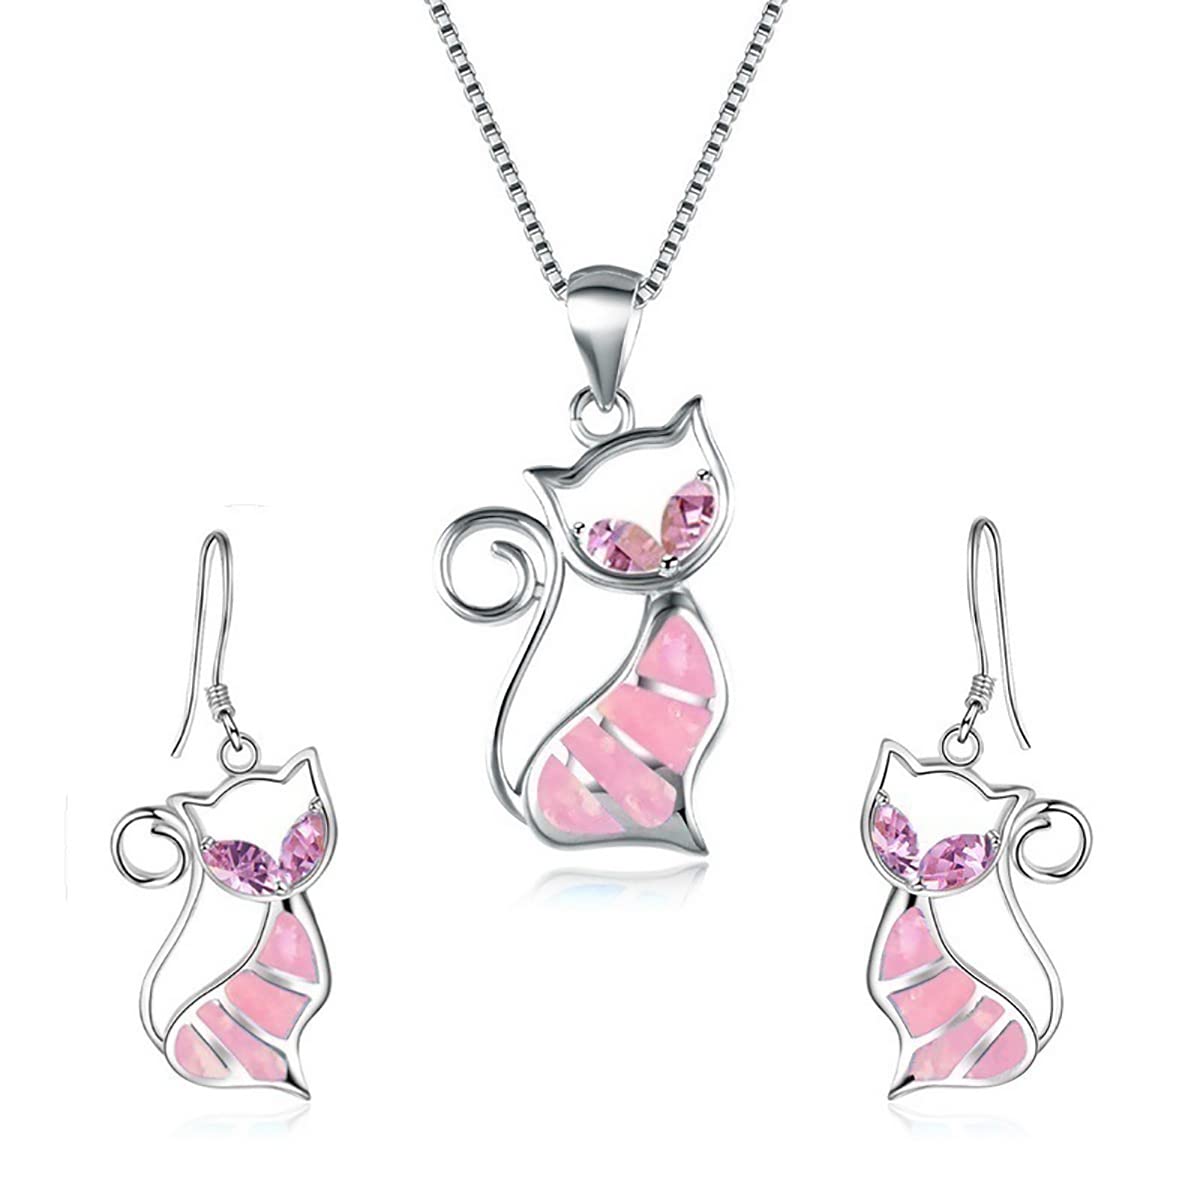 Cute Cat Pendant Necklace &amp; Earrings Matching Set For Women - Ladies Silver Plated Crystal Jewellery with Gift Box